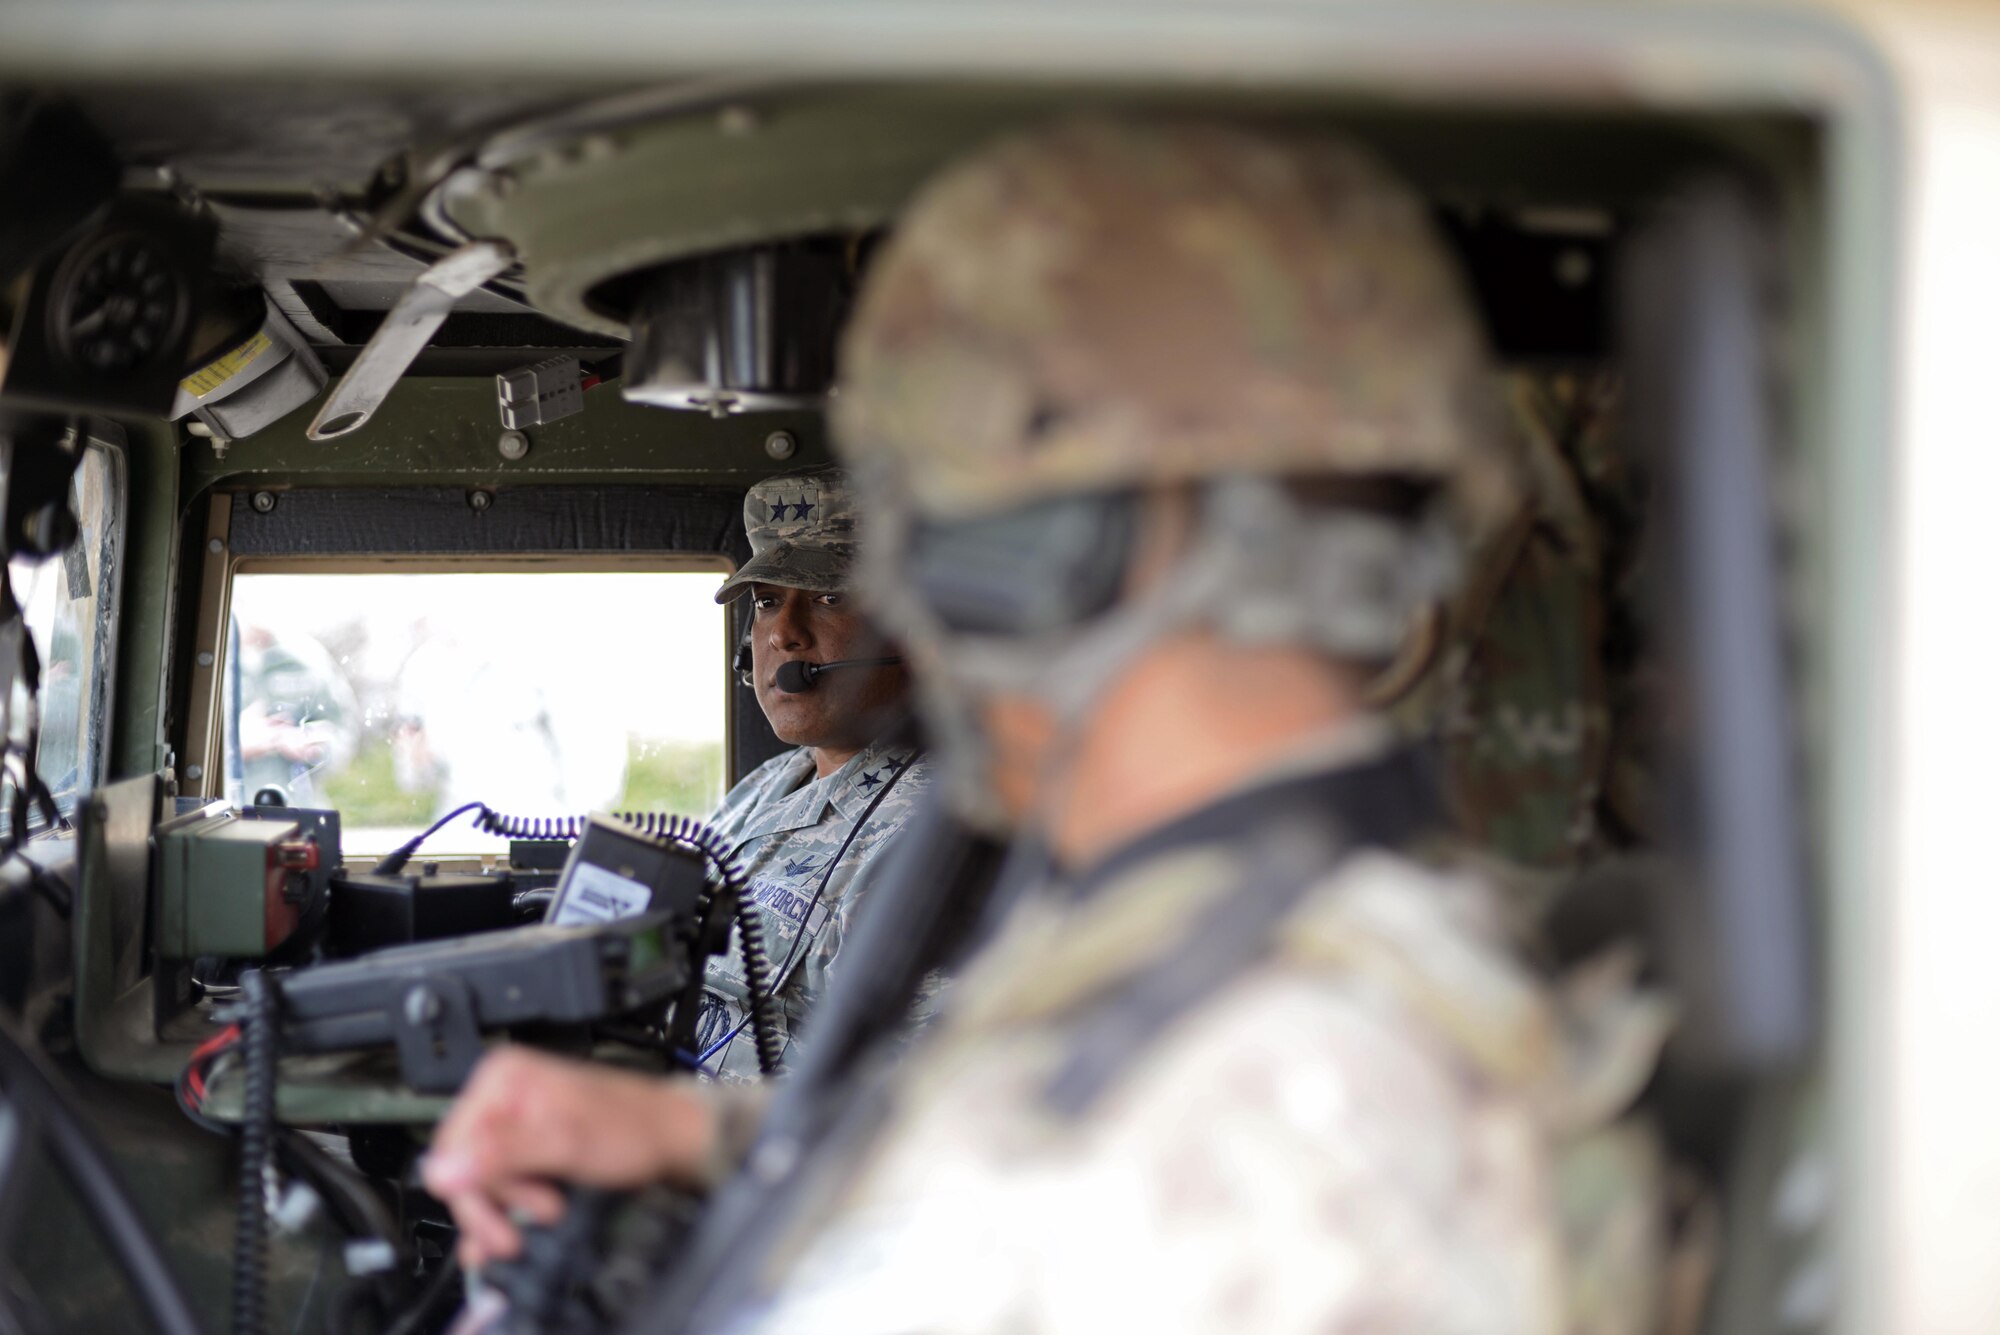 Maj. Gen. Anthony Cotton, 20th Air Force commander, speaks with an Airman inside a Humvee at Minot Air Force Base, N.D., April 28, 2017. Cotton visited the 91st Security Forces Squadron’s training building and a missile alert facility during his tour of the base. (U.S. Air Force photo/Airman 1st Class Austin M. Thomas)